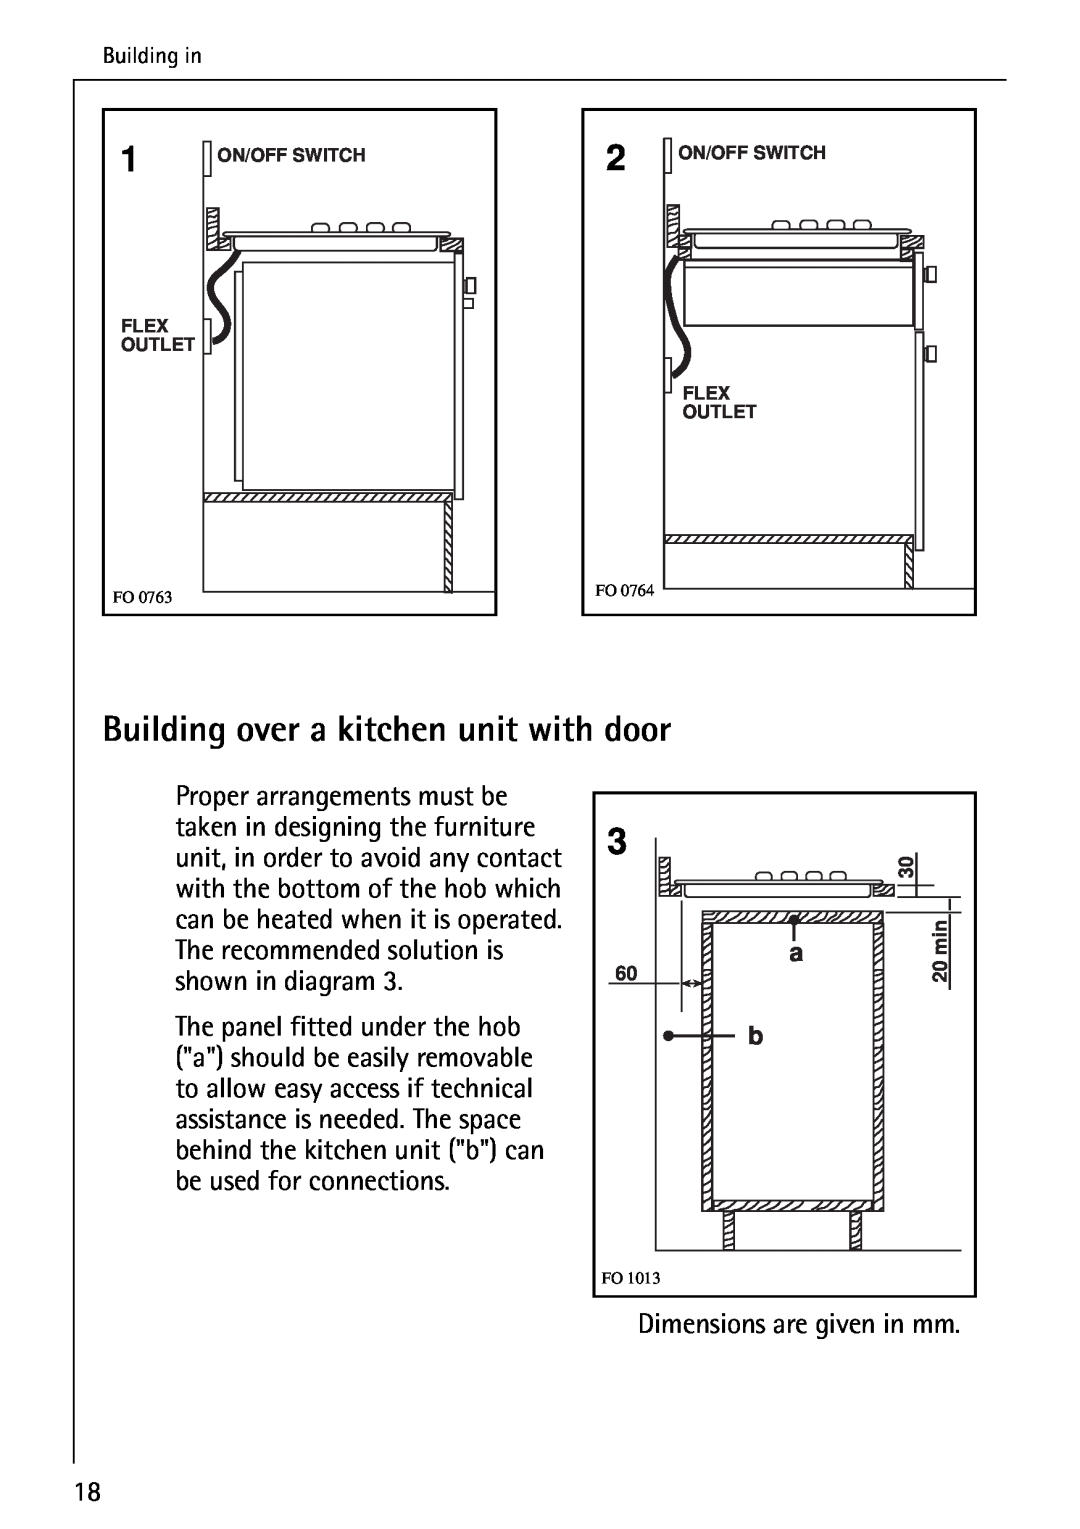 AEG 35601G, 35600G, 34611C, 35610C, 34602G, 35604G Building over a kitchen unit with door, Dimensions are given in mm 